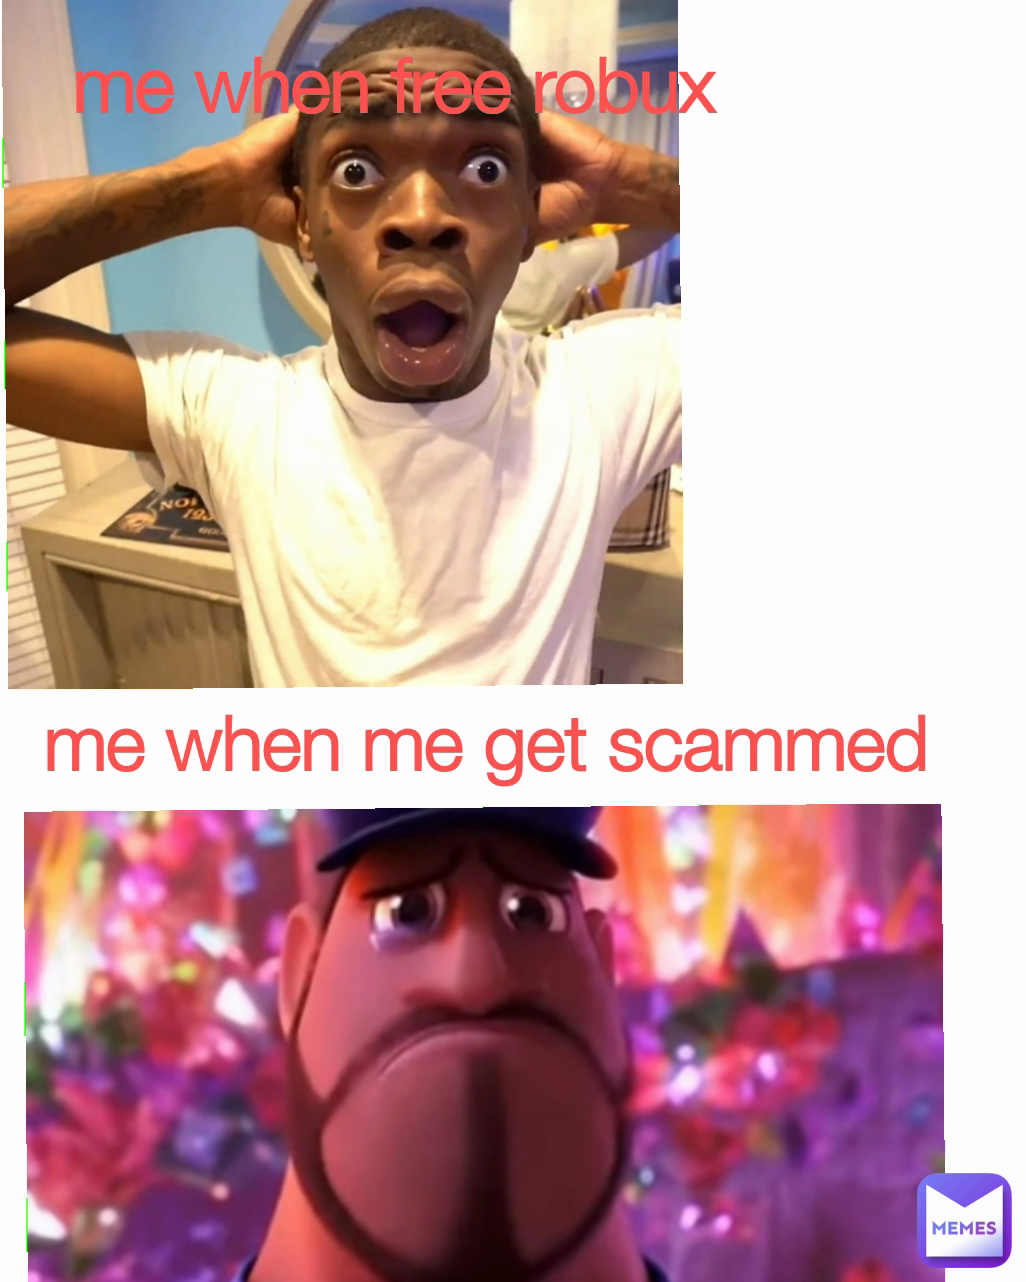 me when free robux me when me get scammed